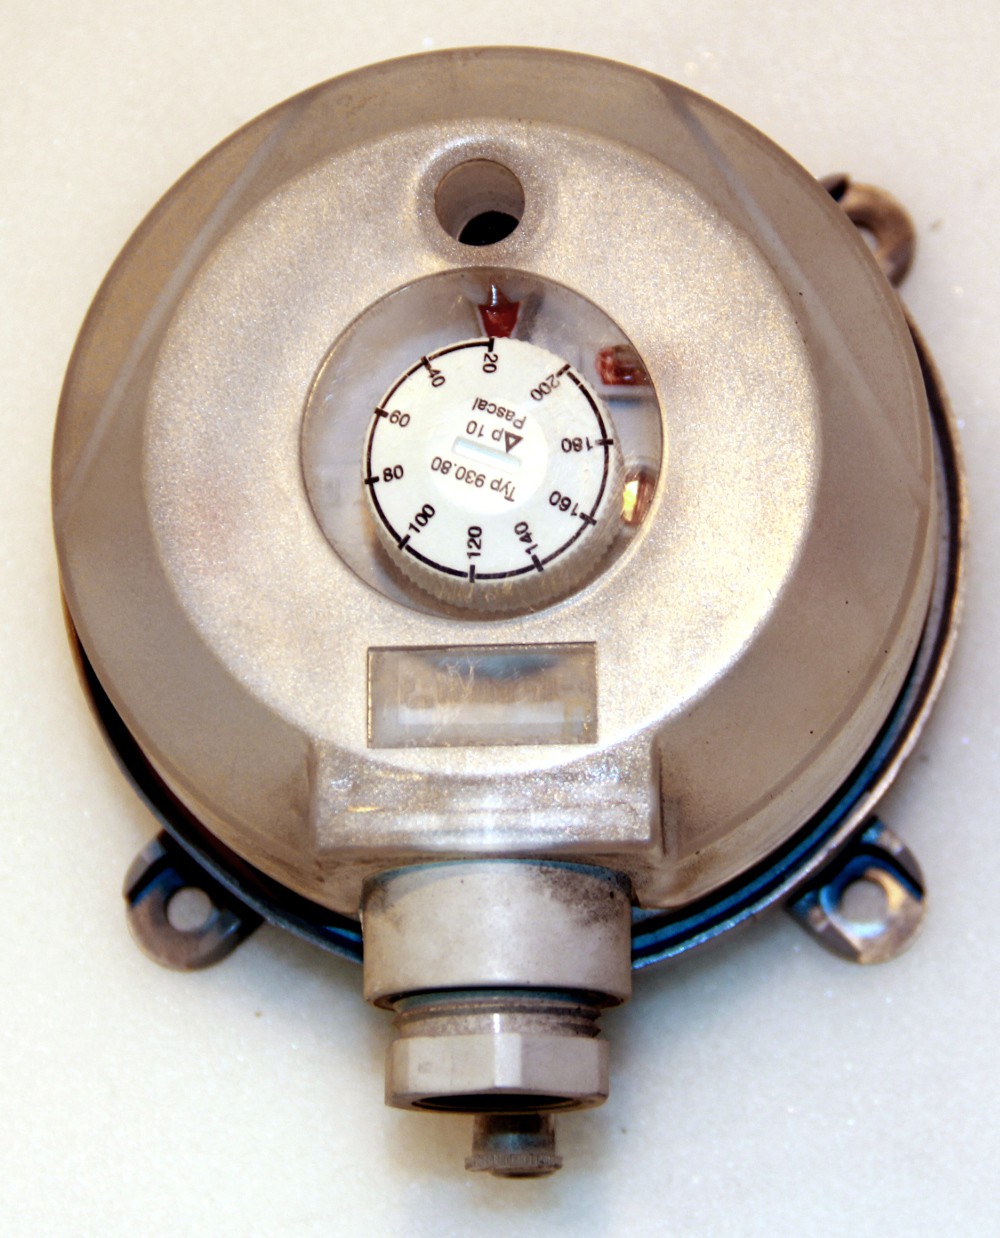 Differential pressure switch CLIMAIR 930.80